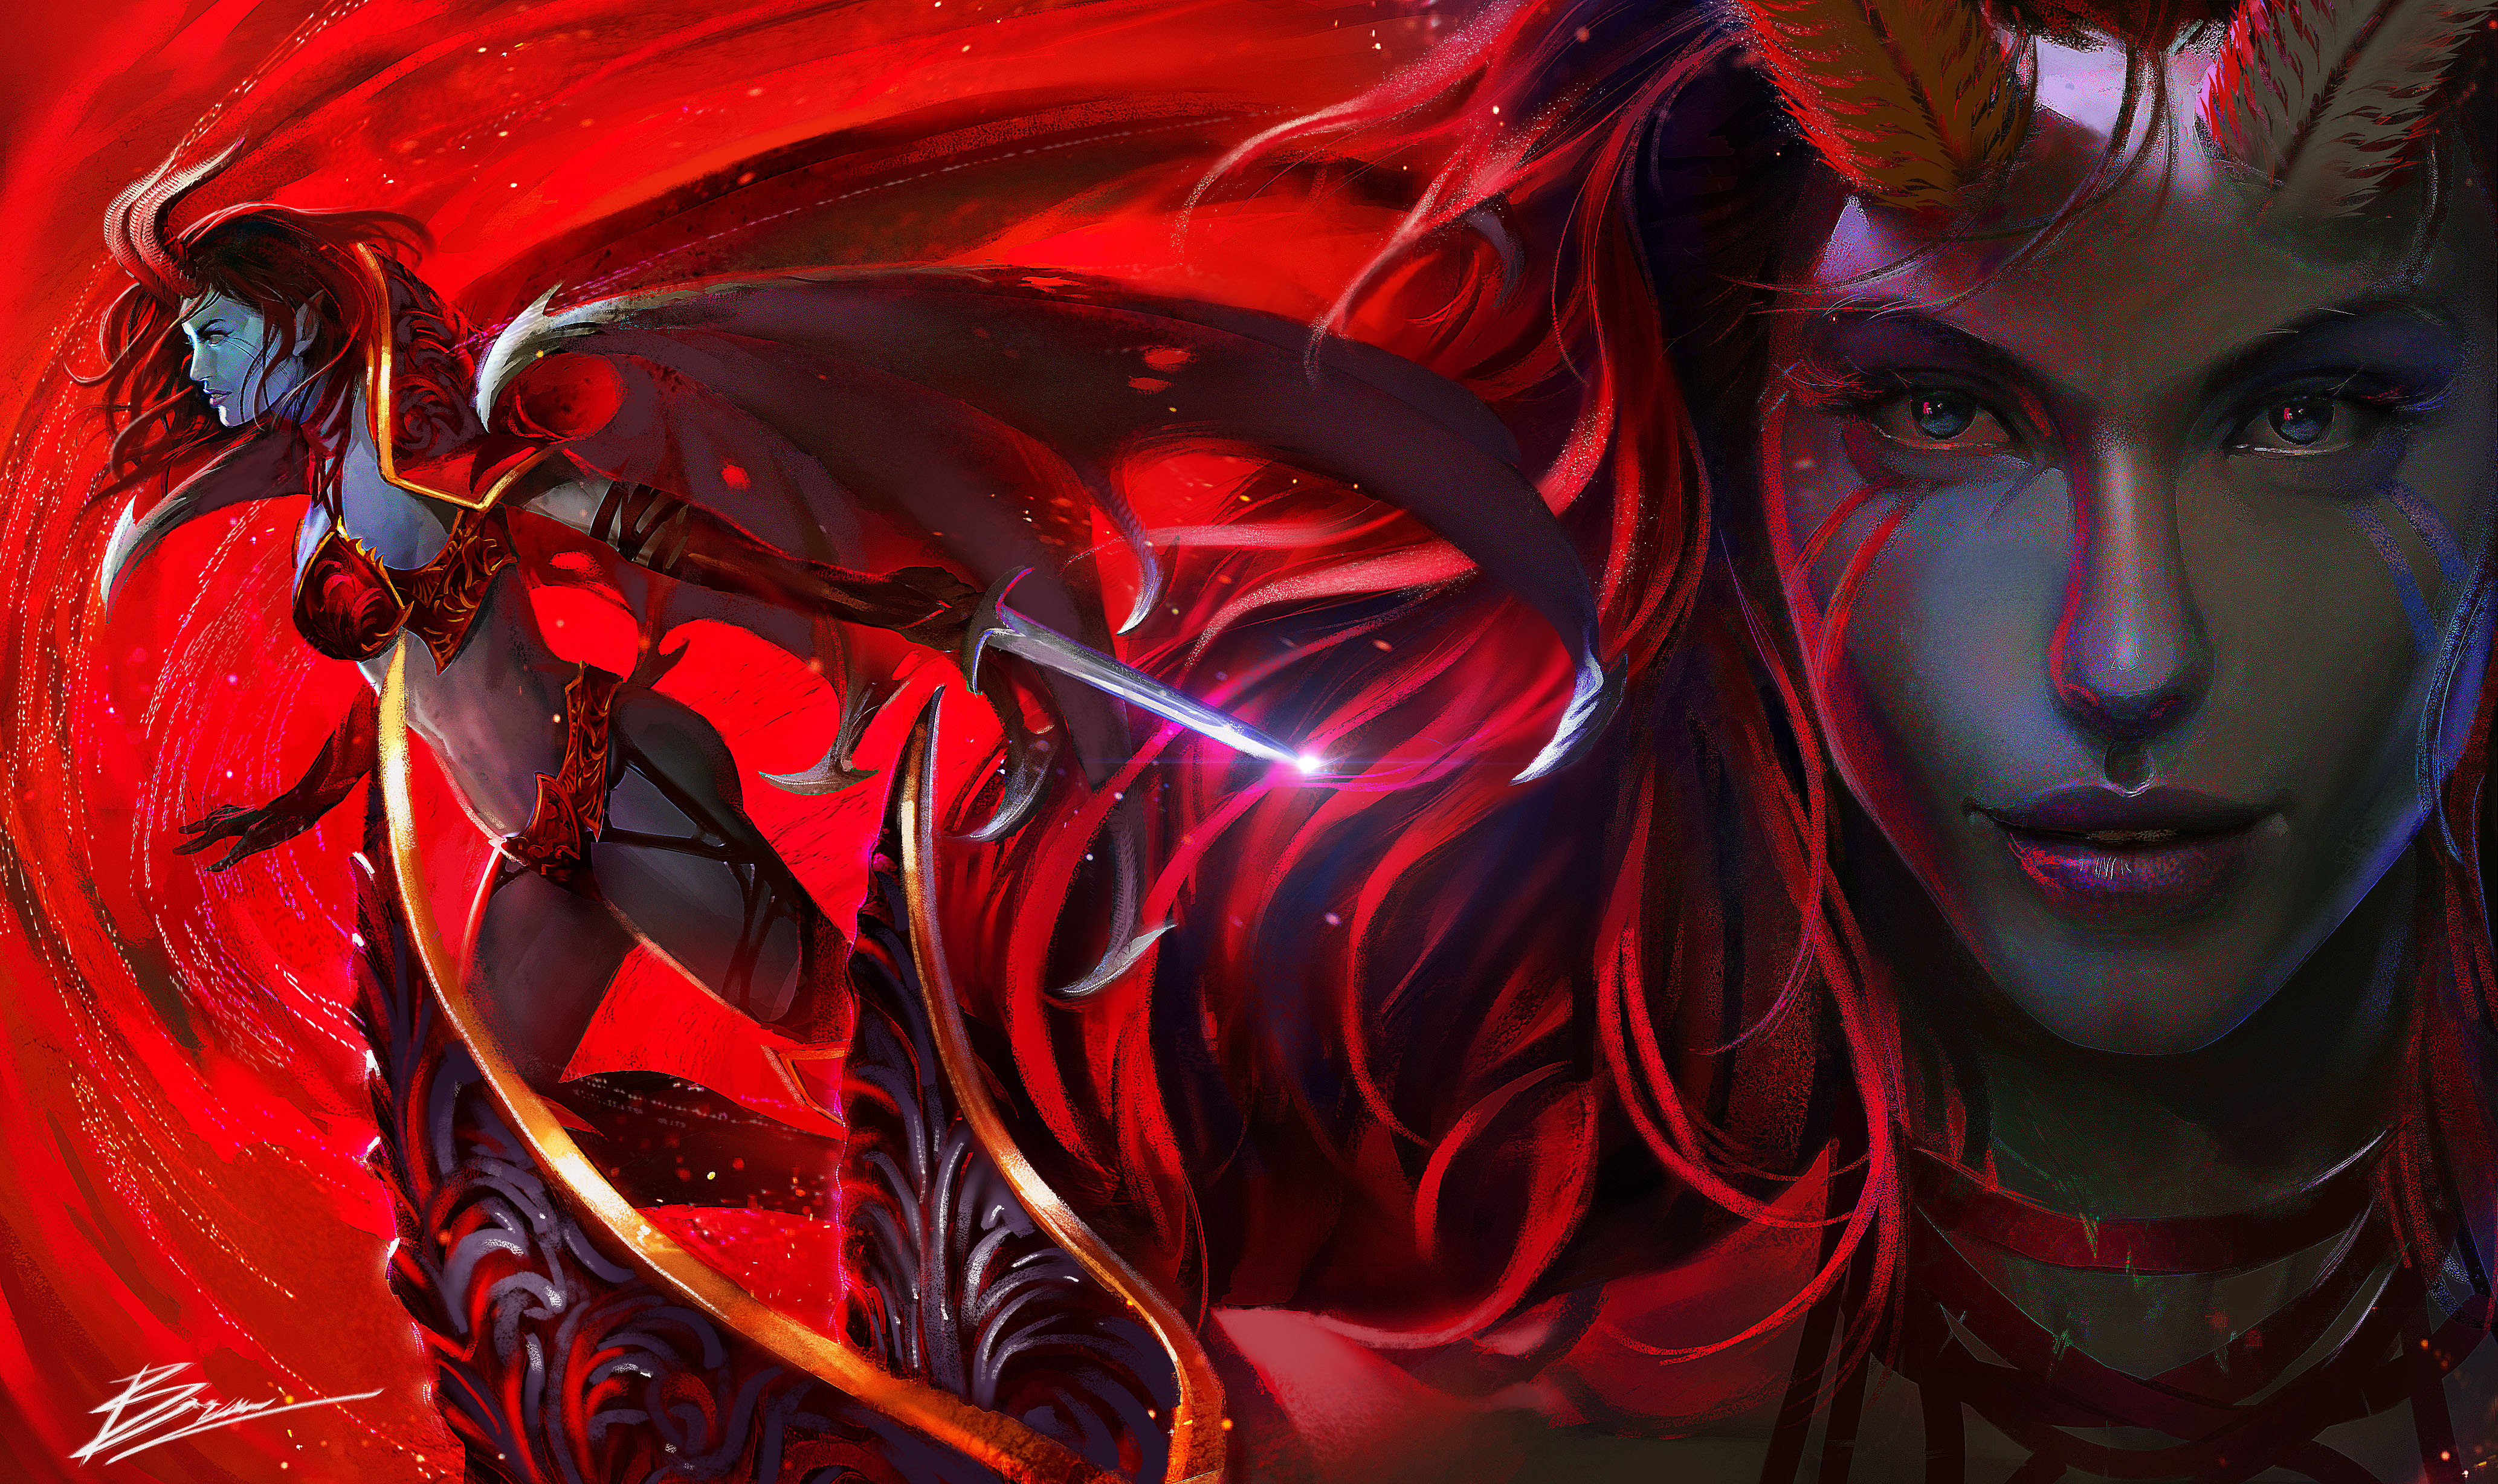 Queen of Pain 4k Ultra HD Wallpaper | Background Image ...
